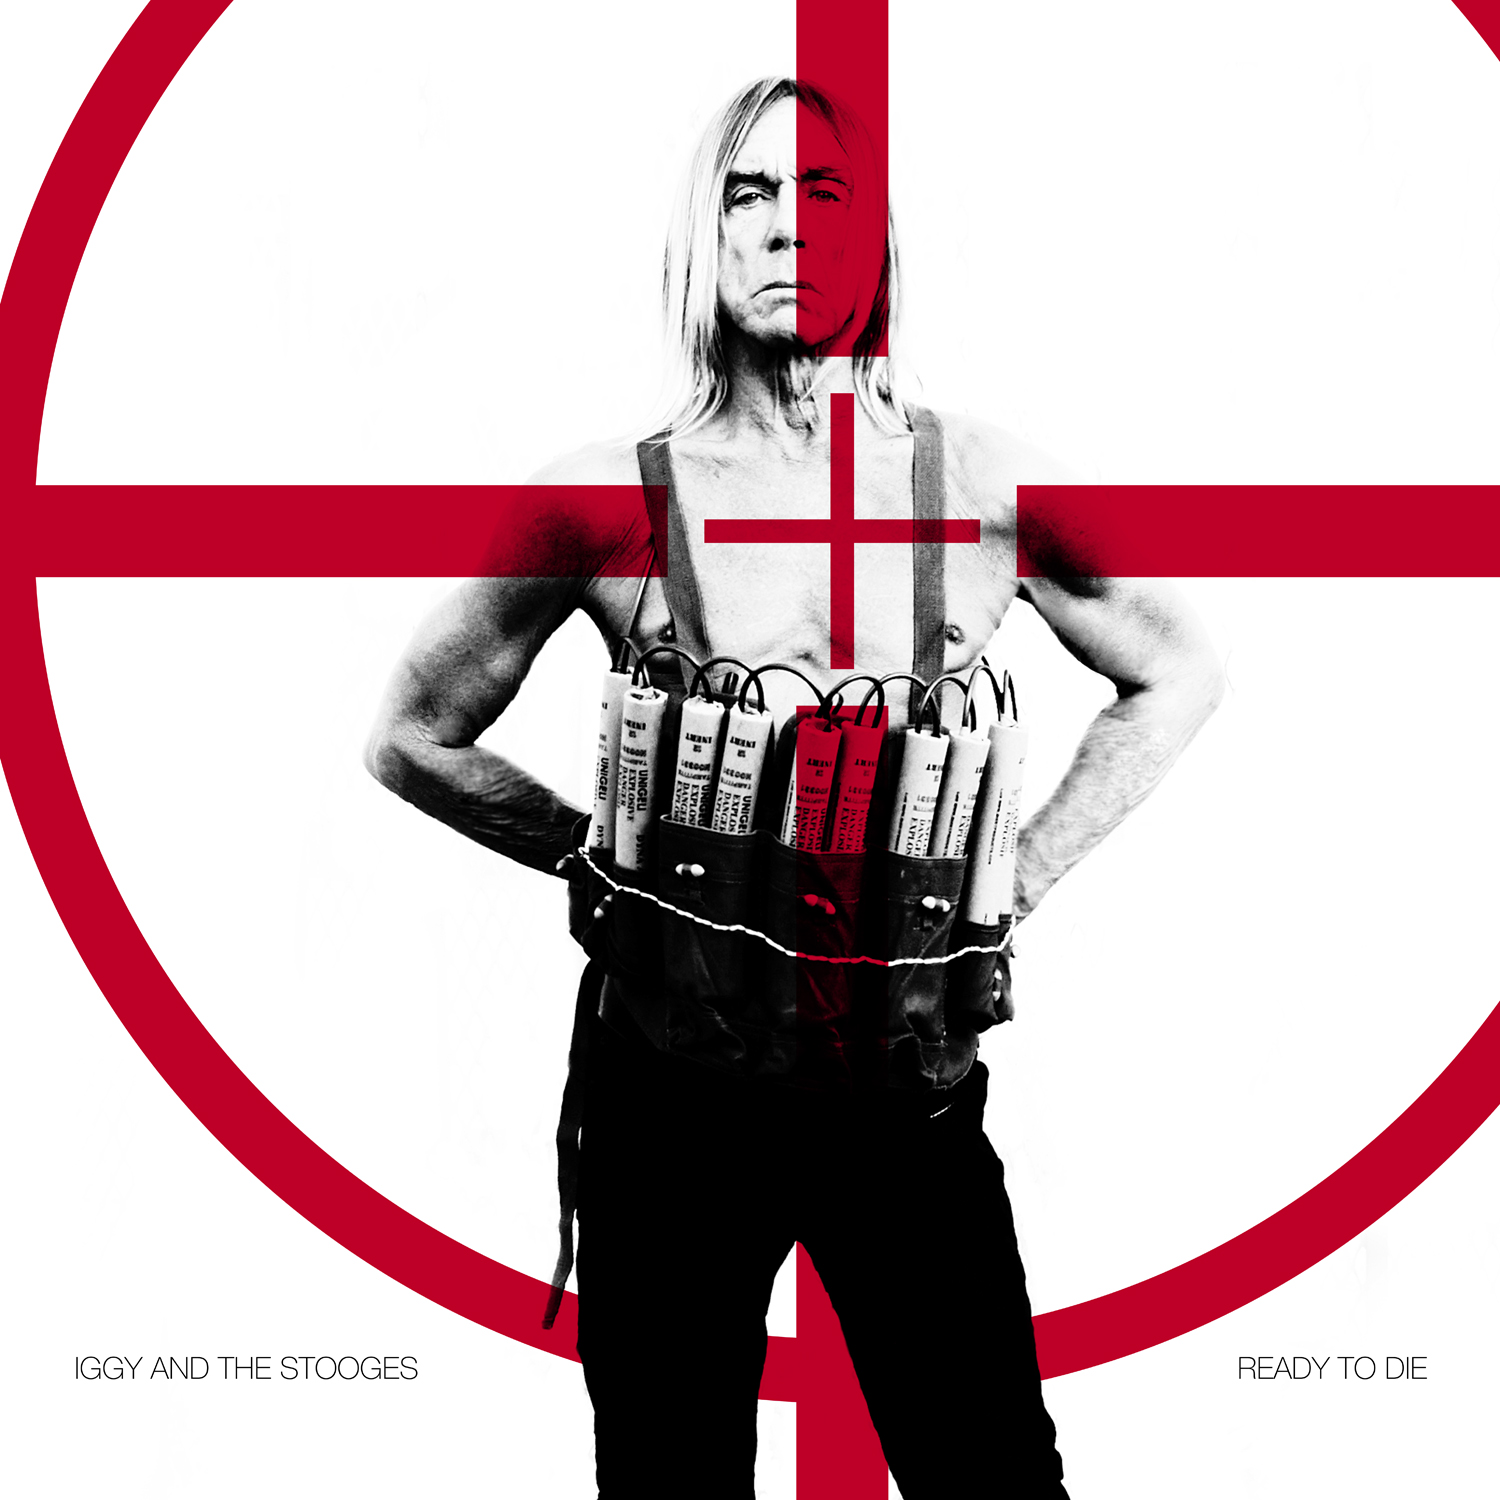 Iggy & The Stooges announce new album, ‘Ready To Die’